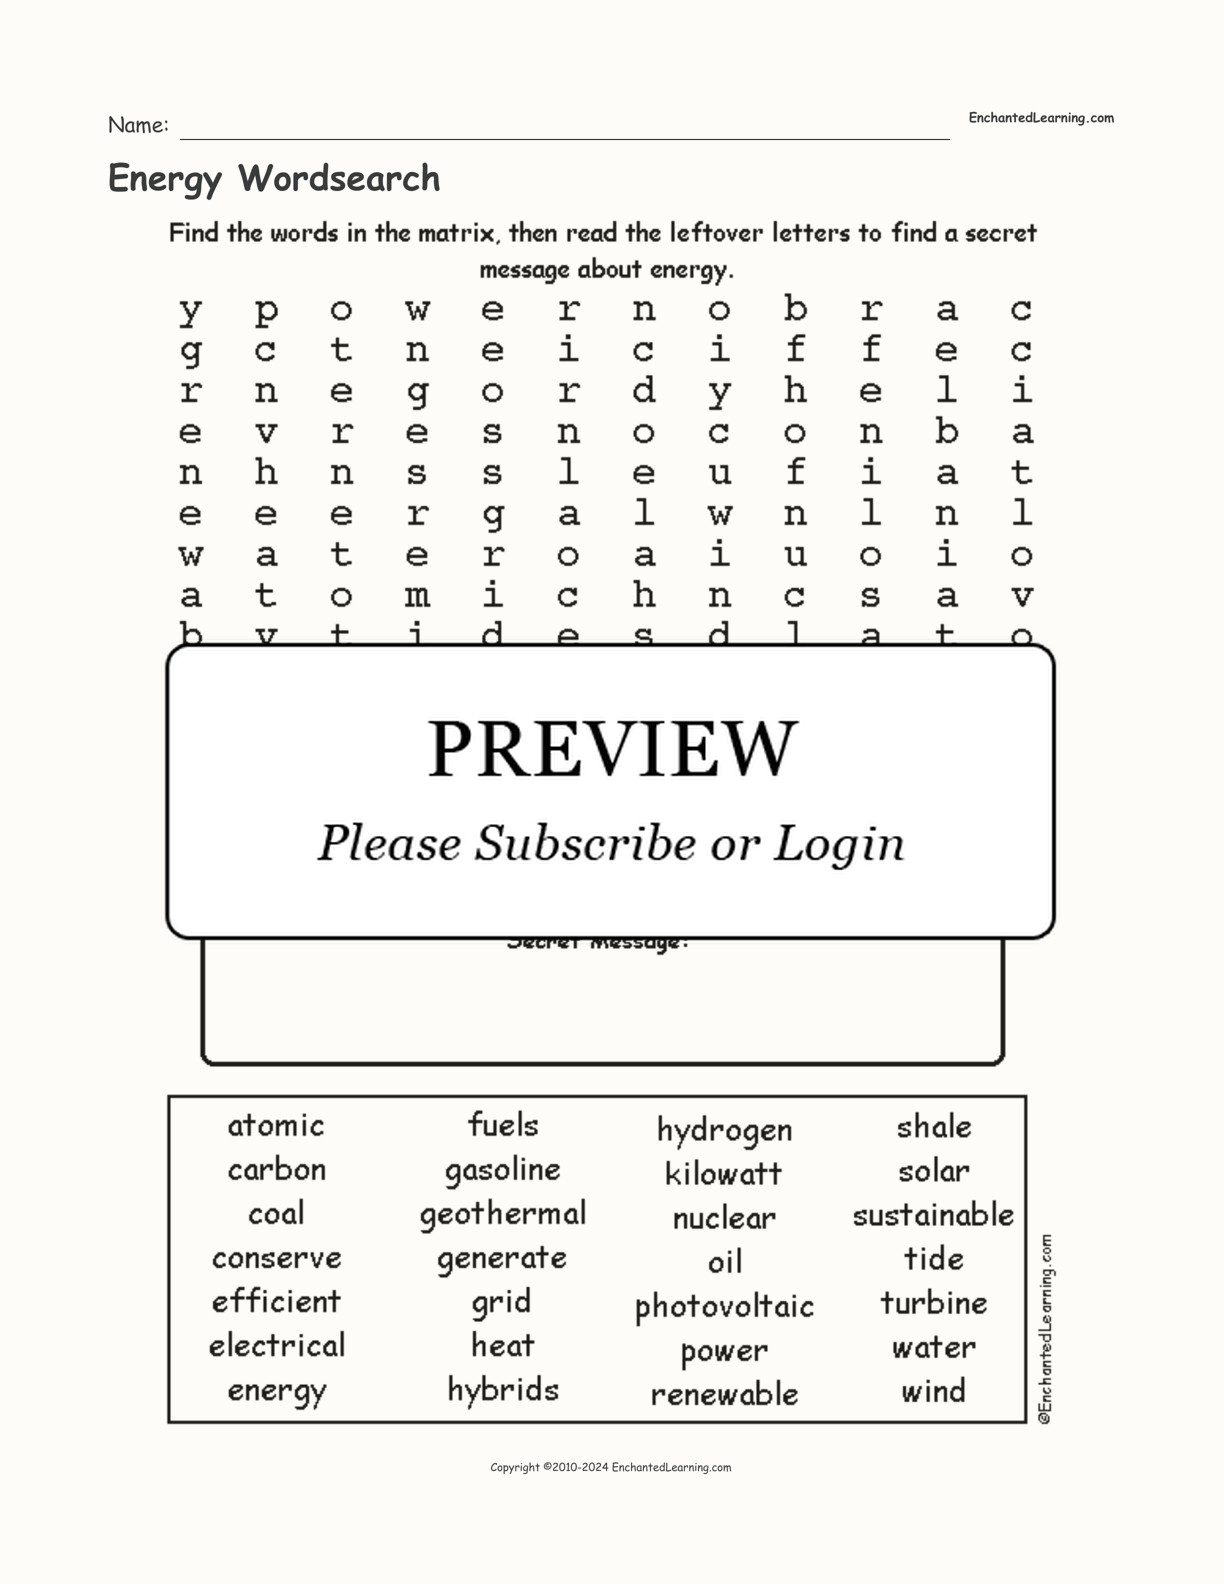 Energy Wordsearch interactive worksheet page 1